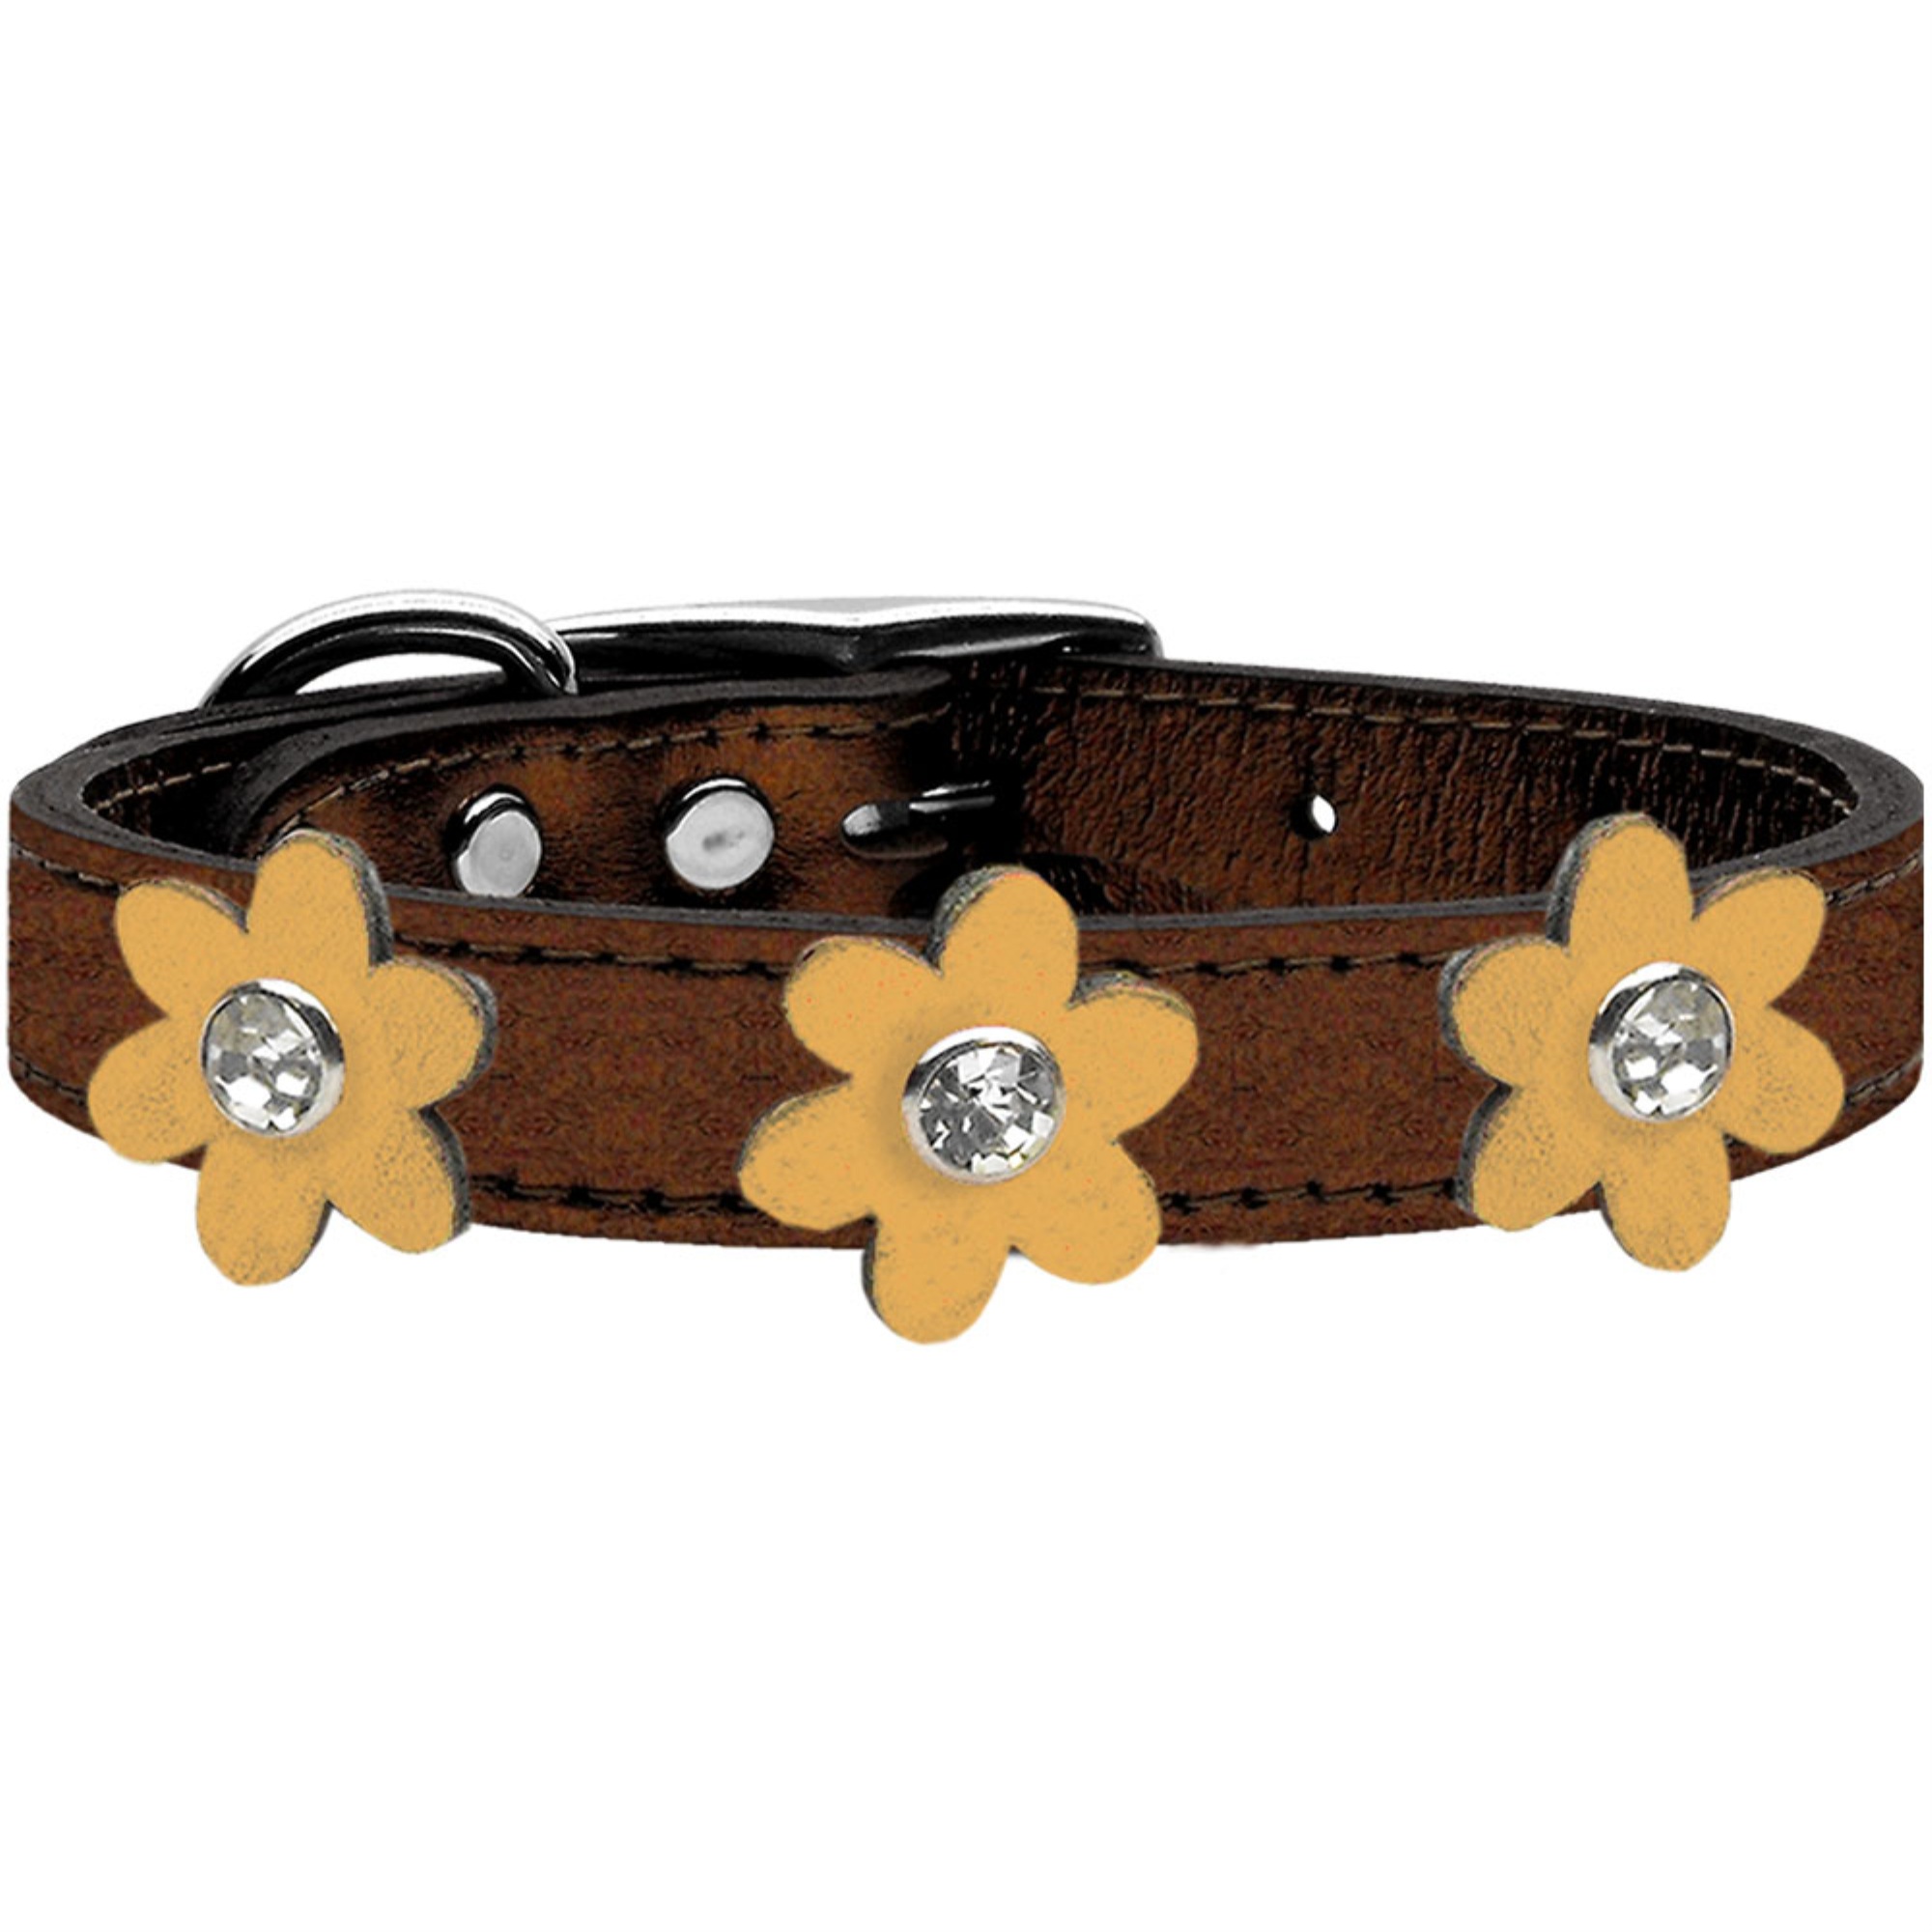 Mirage Pet Products Metallic Flower Leather Collar Bronze With Gold flowers Size 14